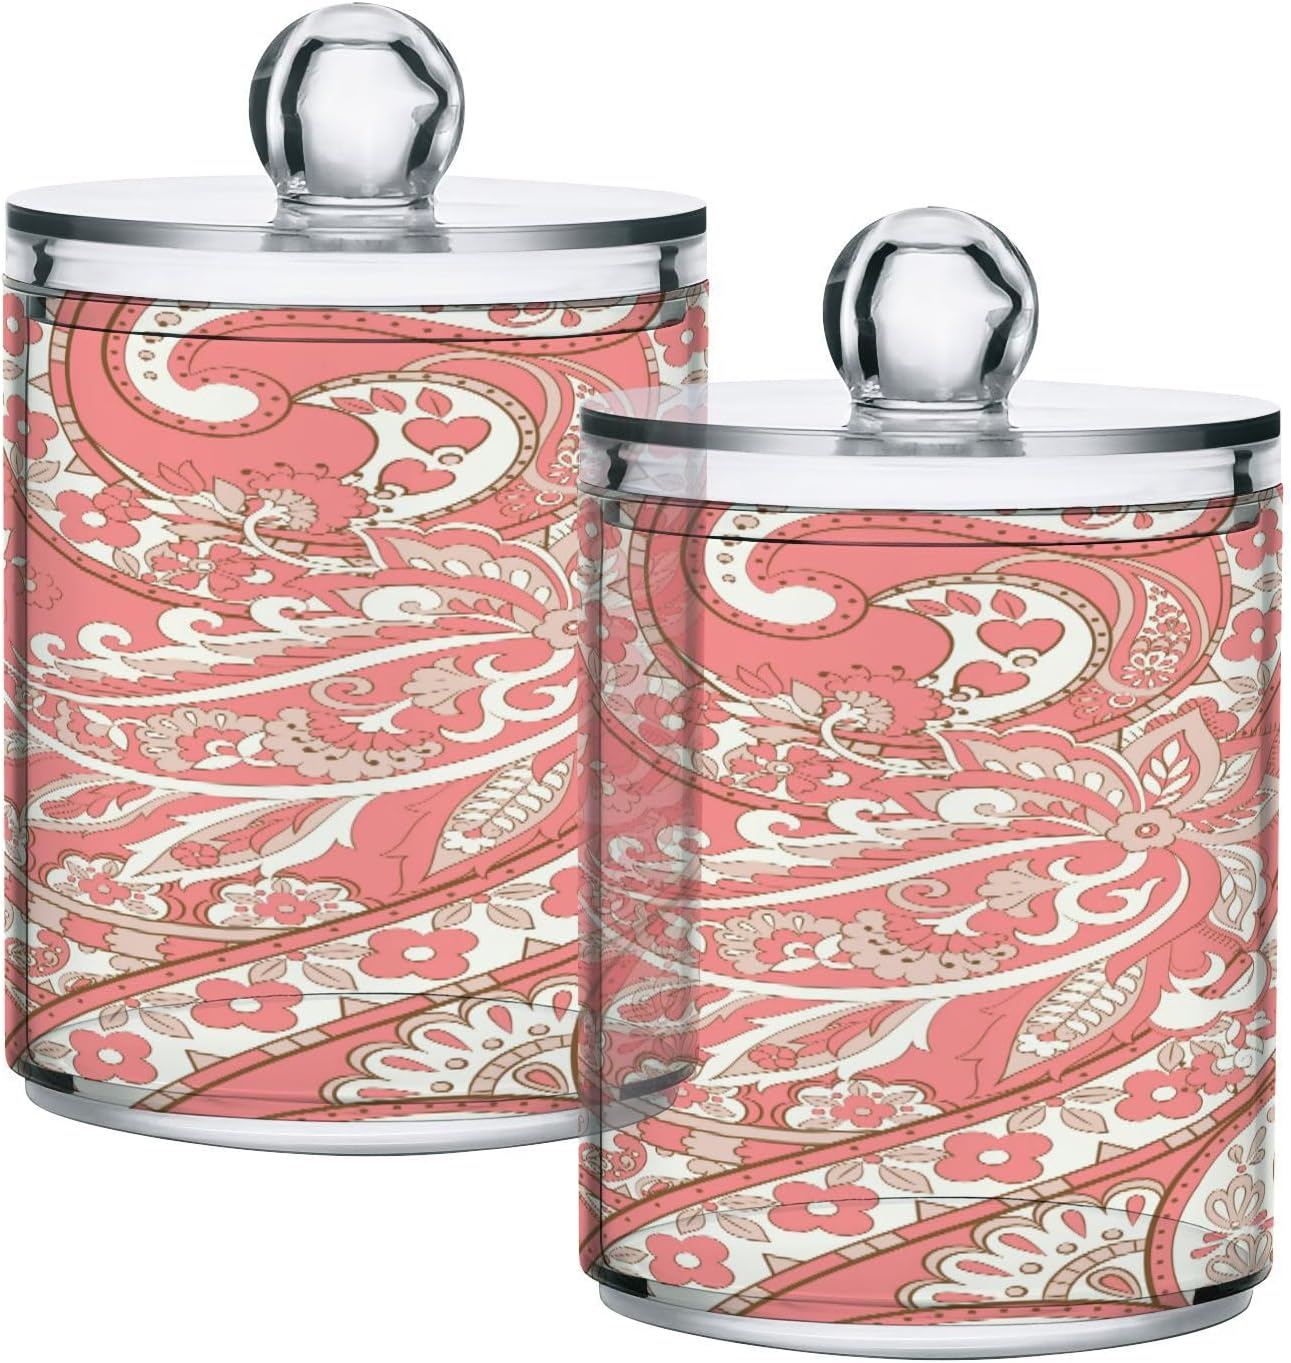 YETTASBIN Pink Damask Clear Plastic Apothecary Jars 4 Pack, 14 oz Qtip Holder Dispenser with Lid, Clear Bathroom Storage Canister for Cotton Ball, Cotton Swab